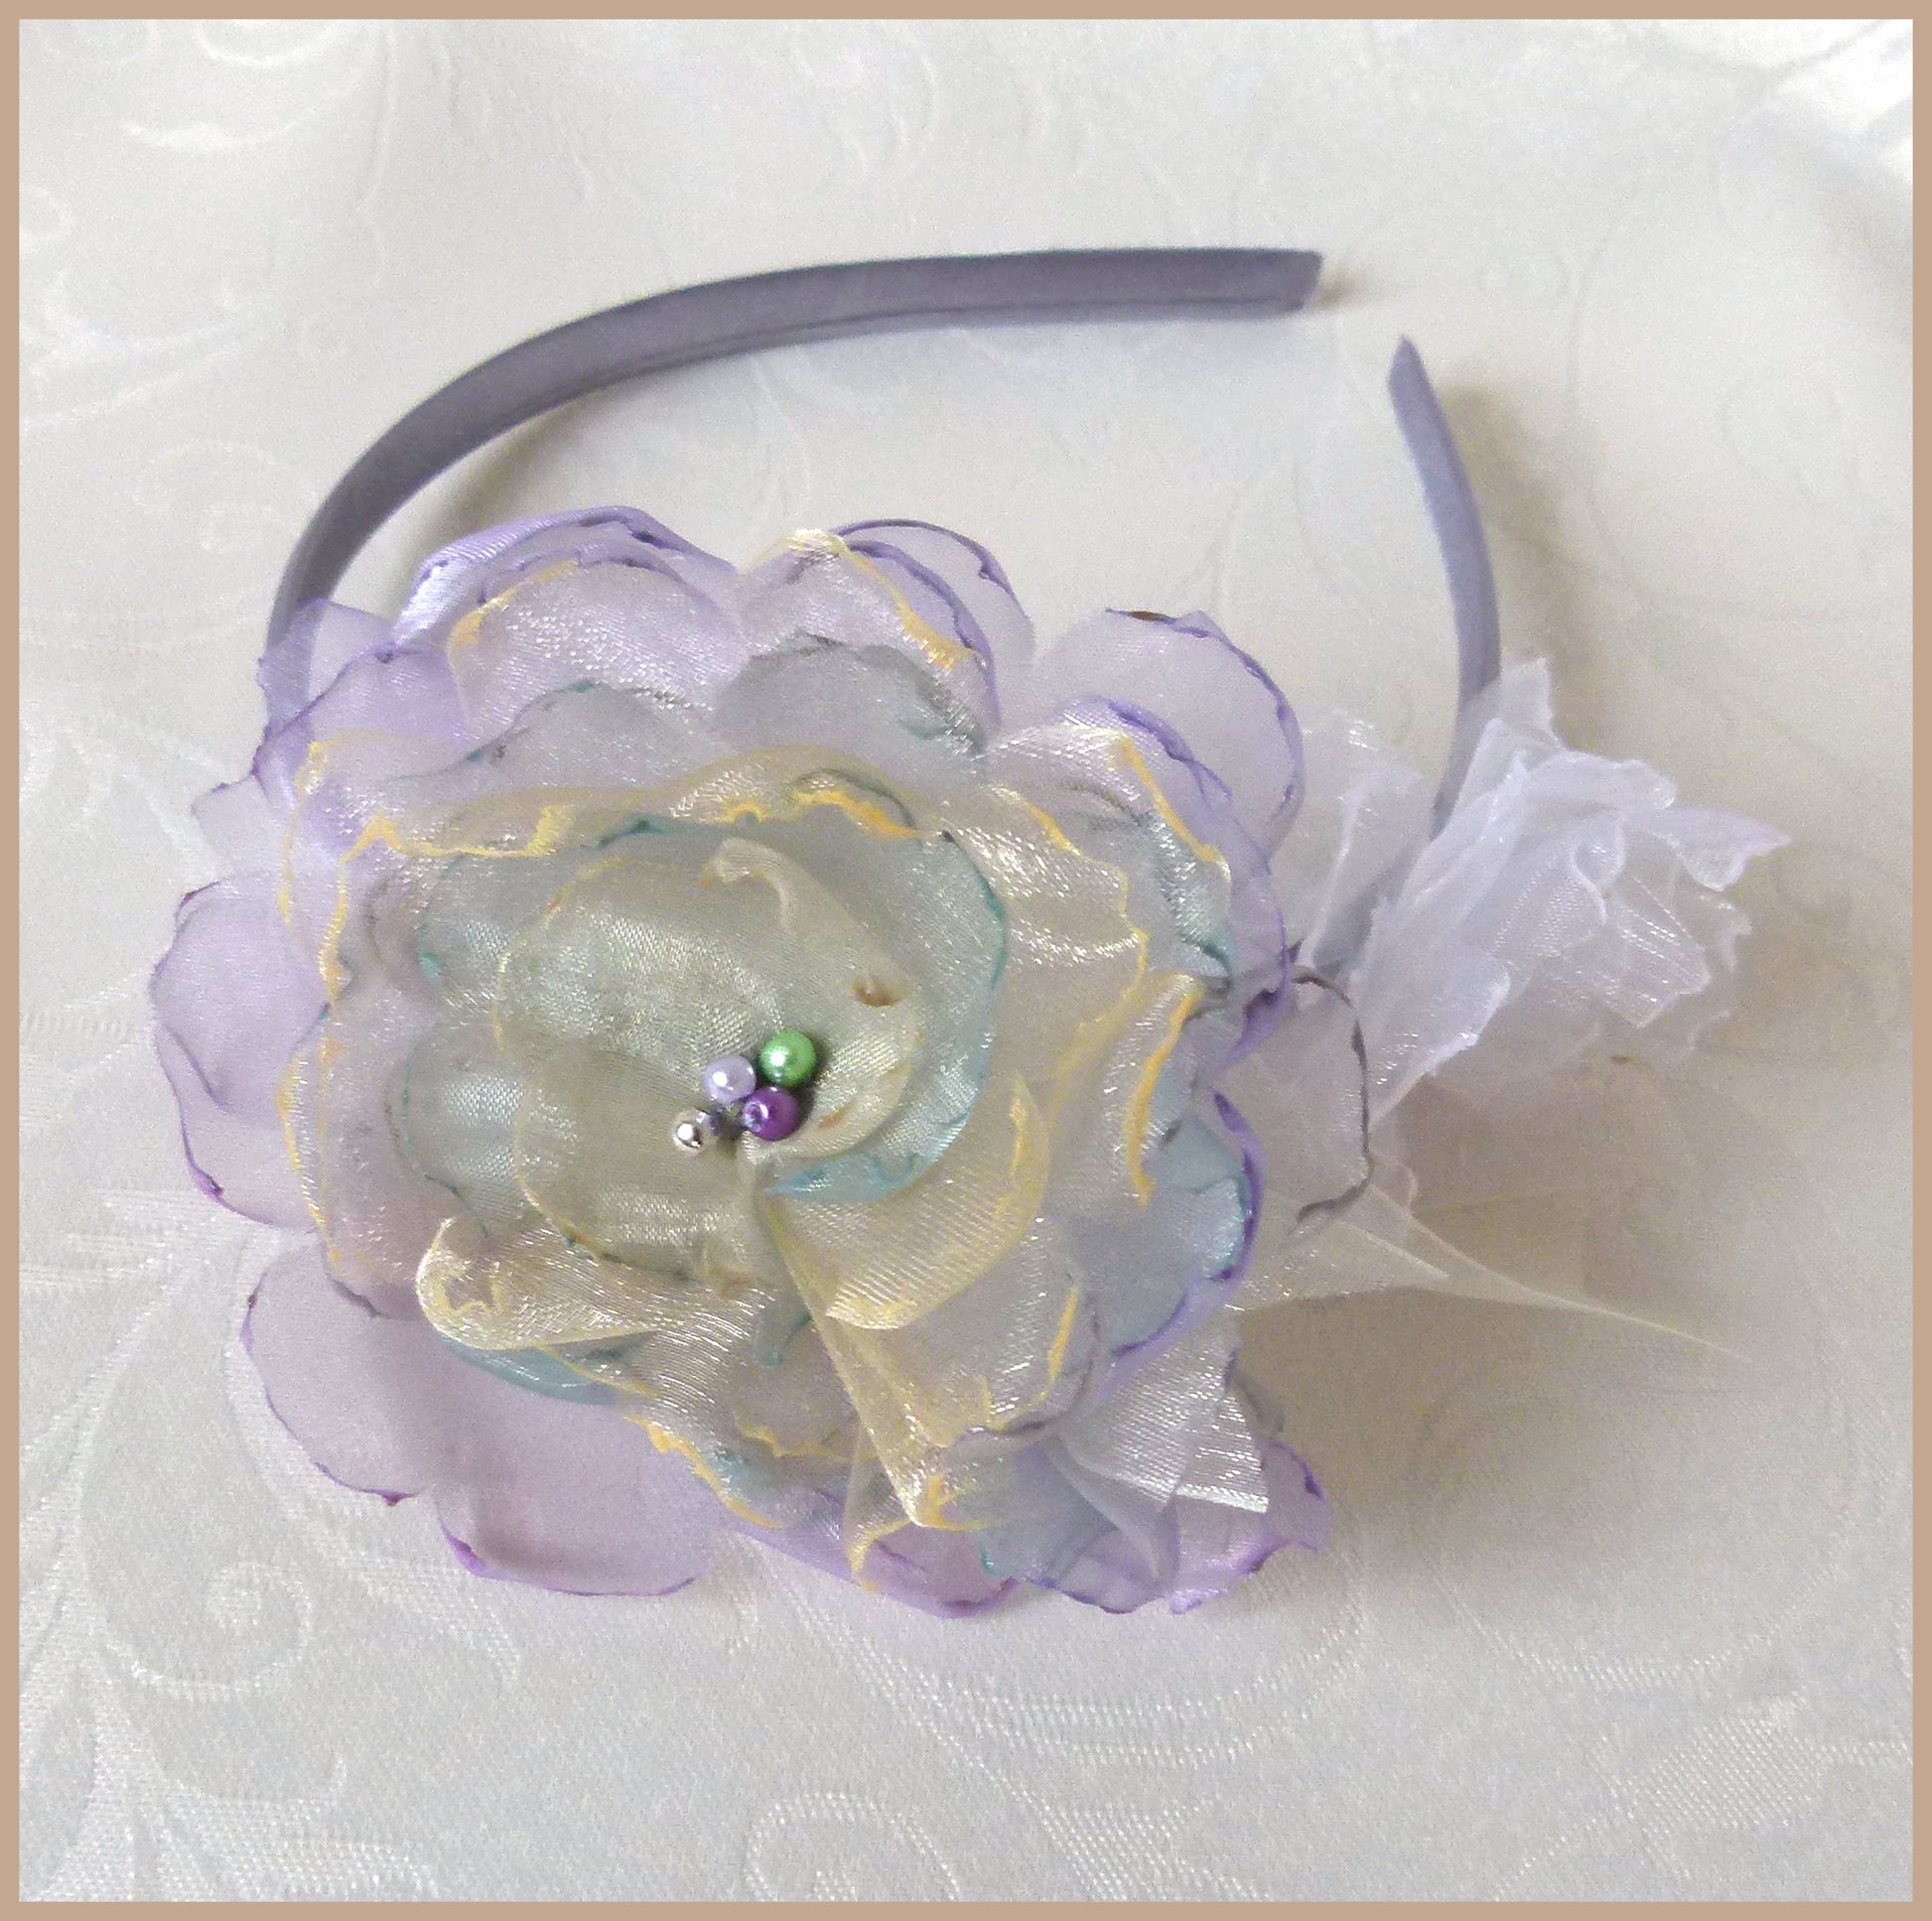 Grey Satin-Covered Alice Band with White and Mauve/Cream/Green Beaded Organza Flowers